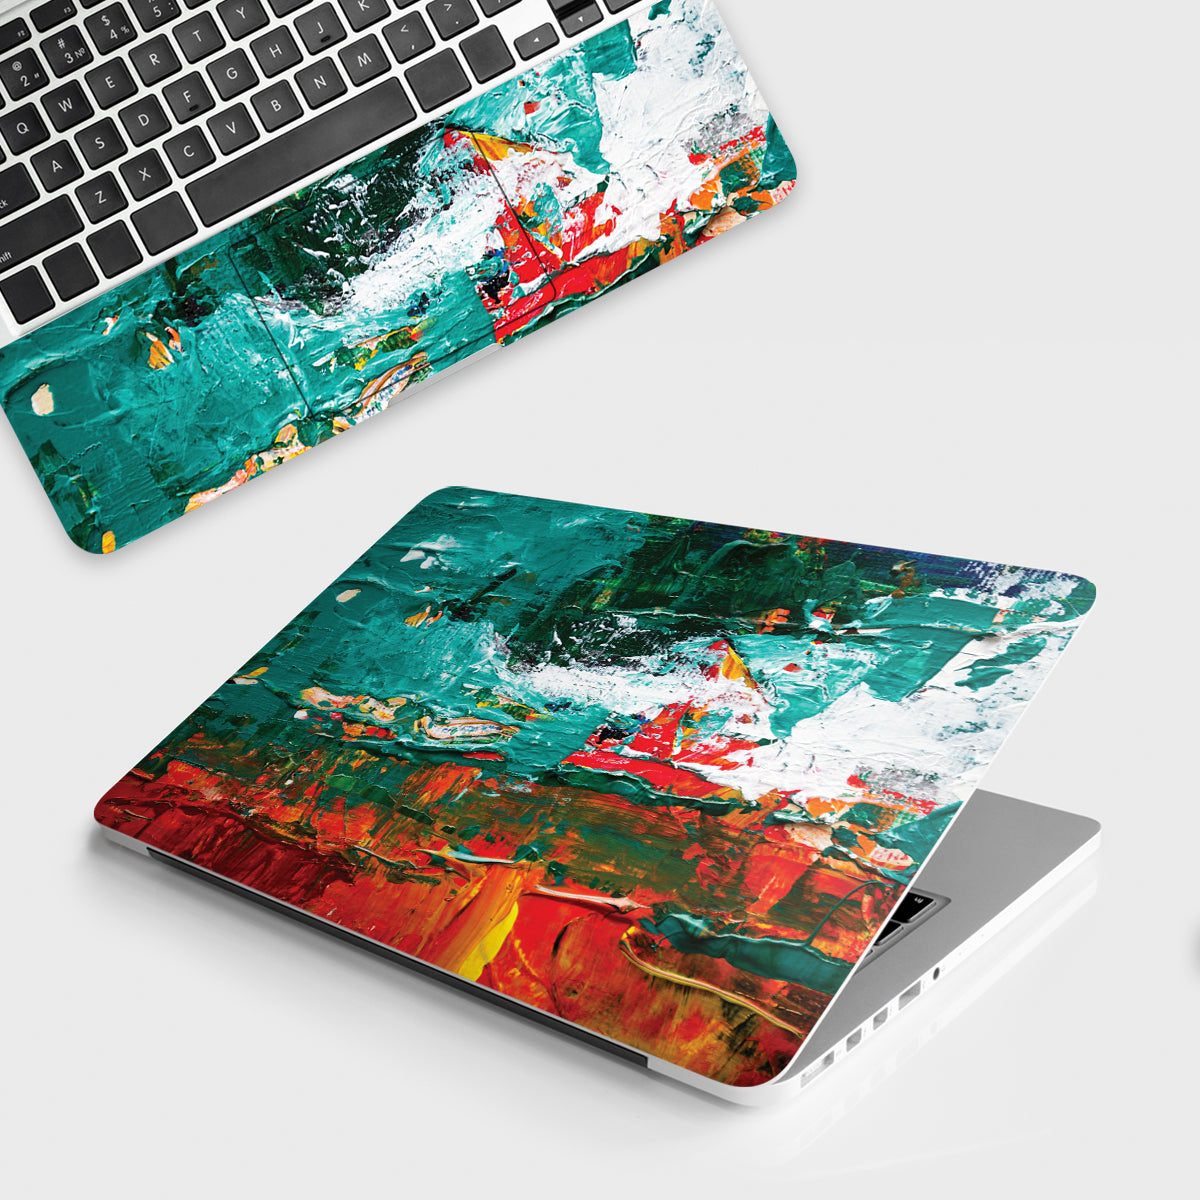 Fomo Store Laptop Skins Abstract Paint